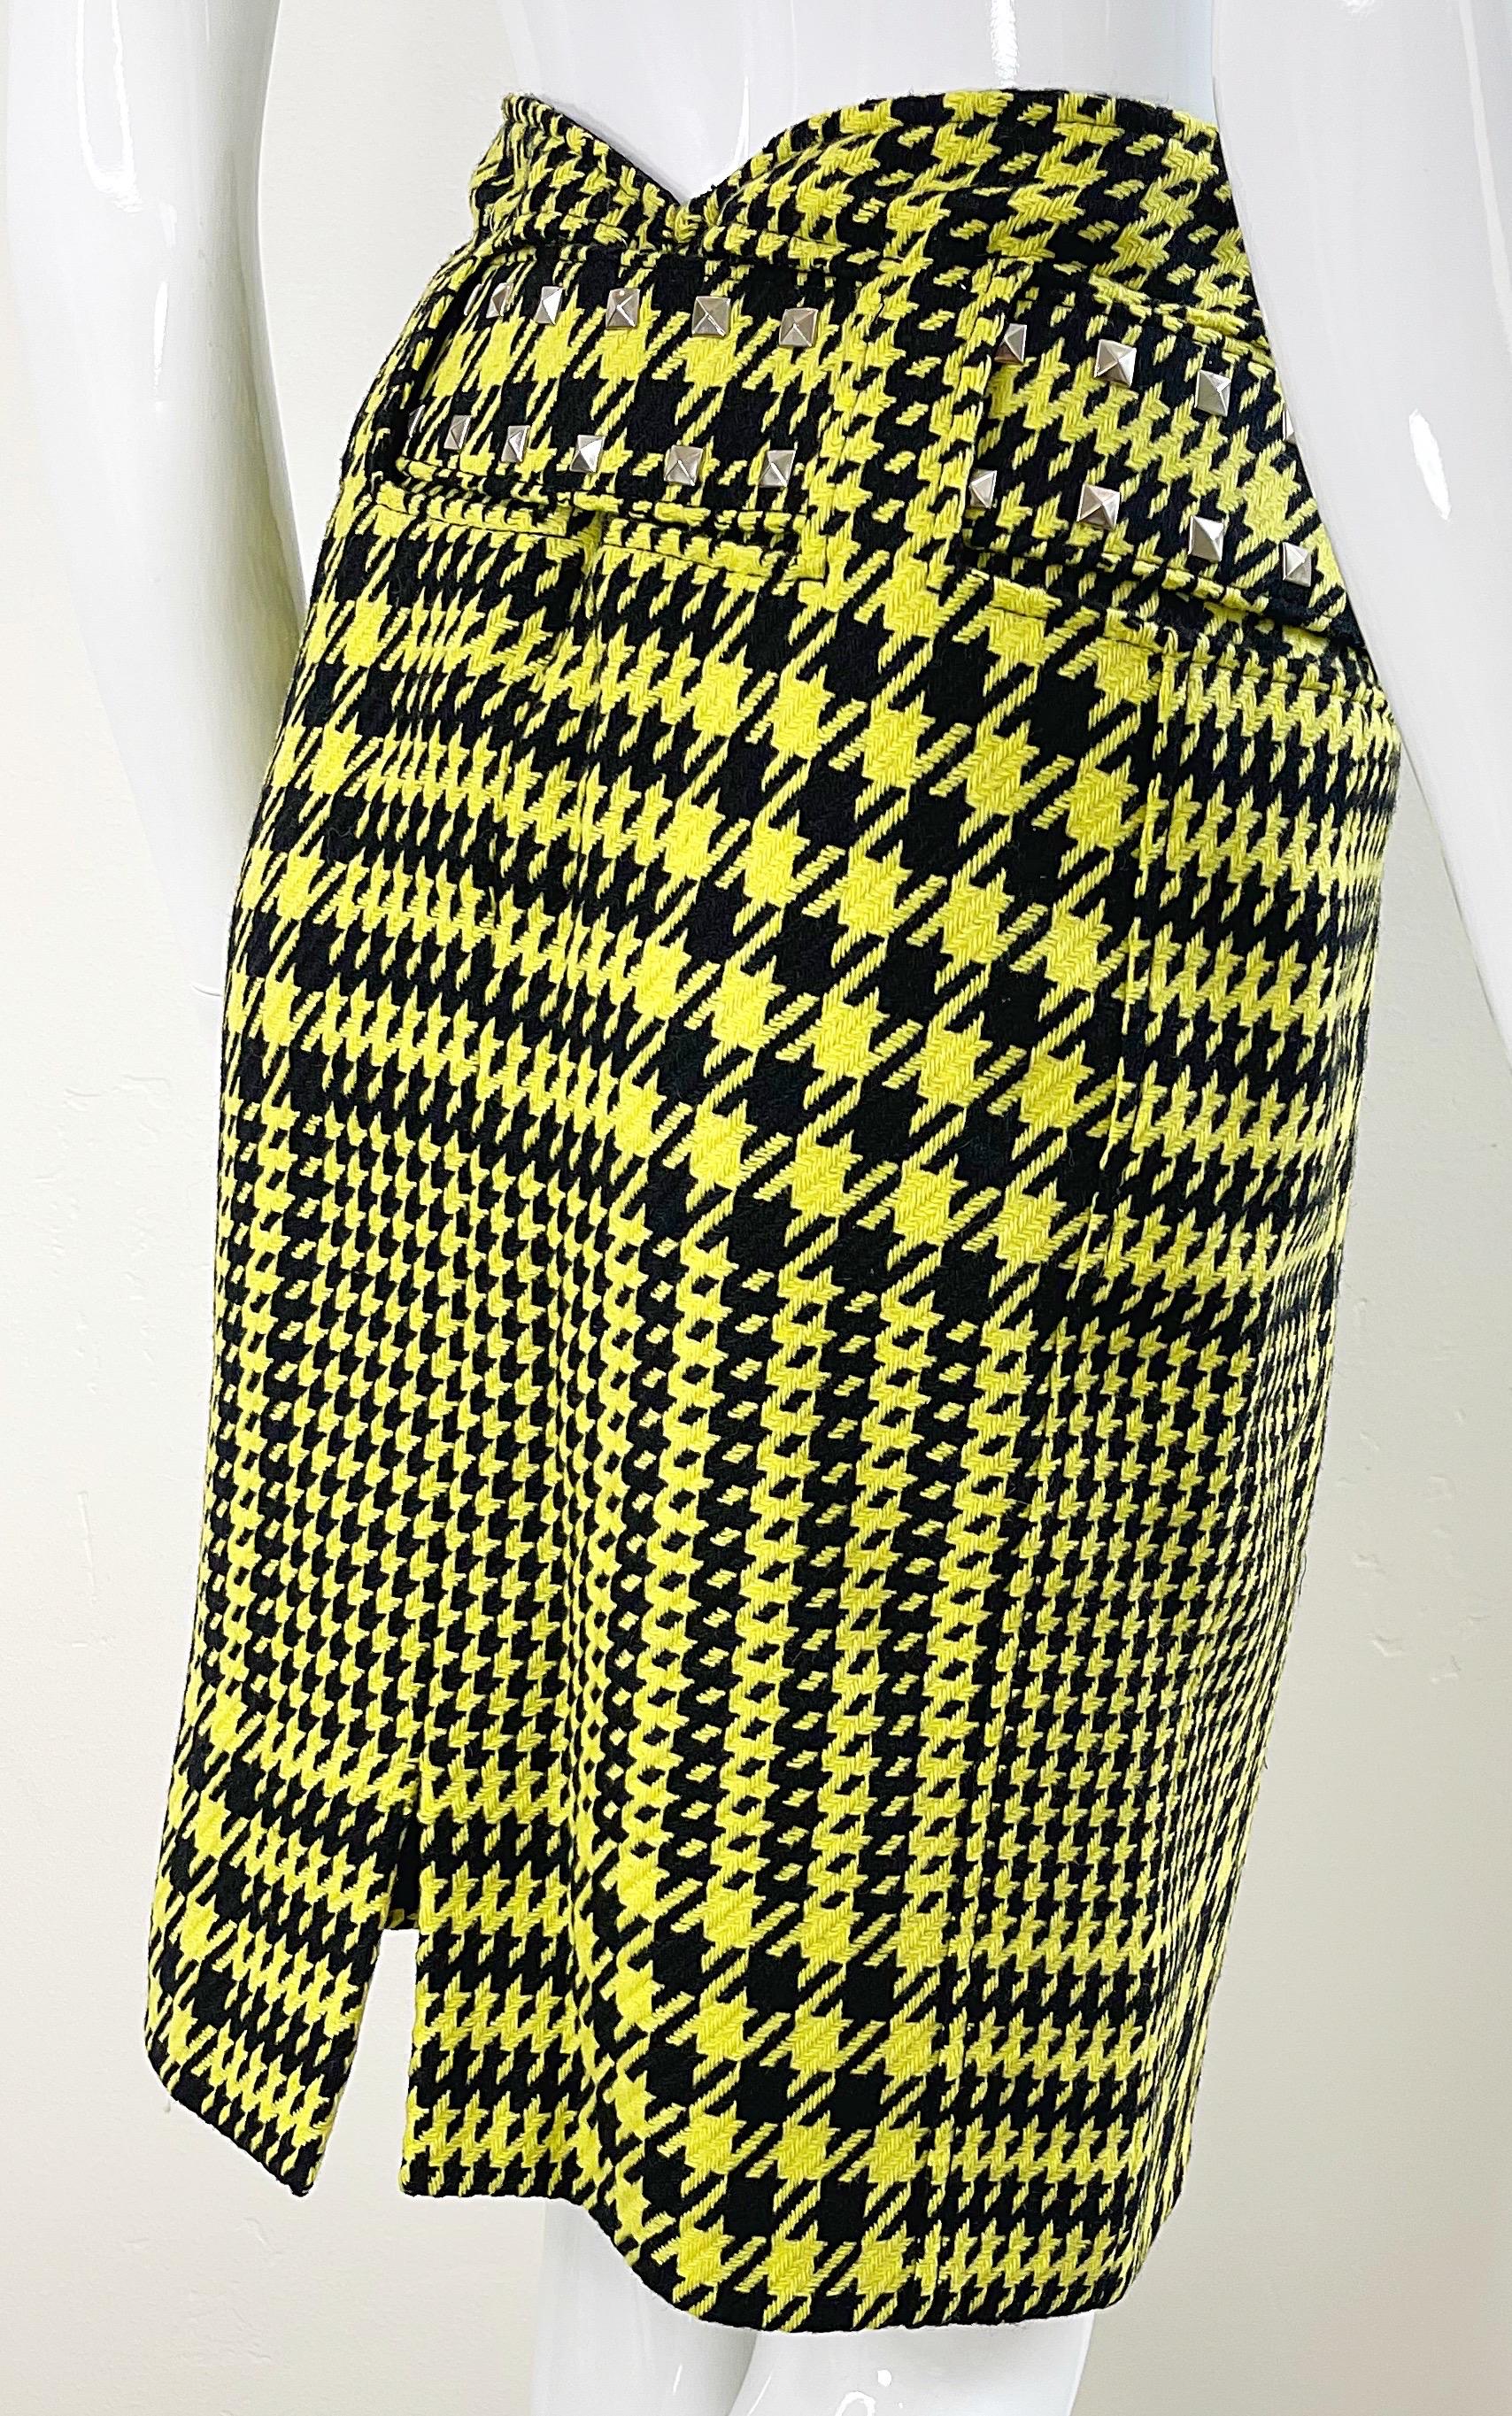 Gianni Versace Fall 2004 Runway Size 8 Yellow Black Houndstooth Belted Skirt For Sale 9